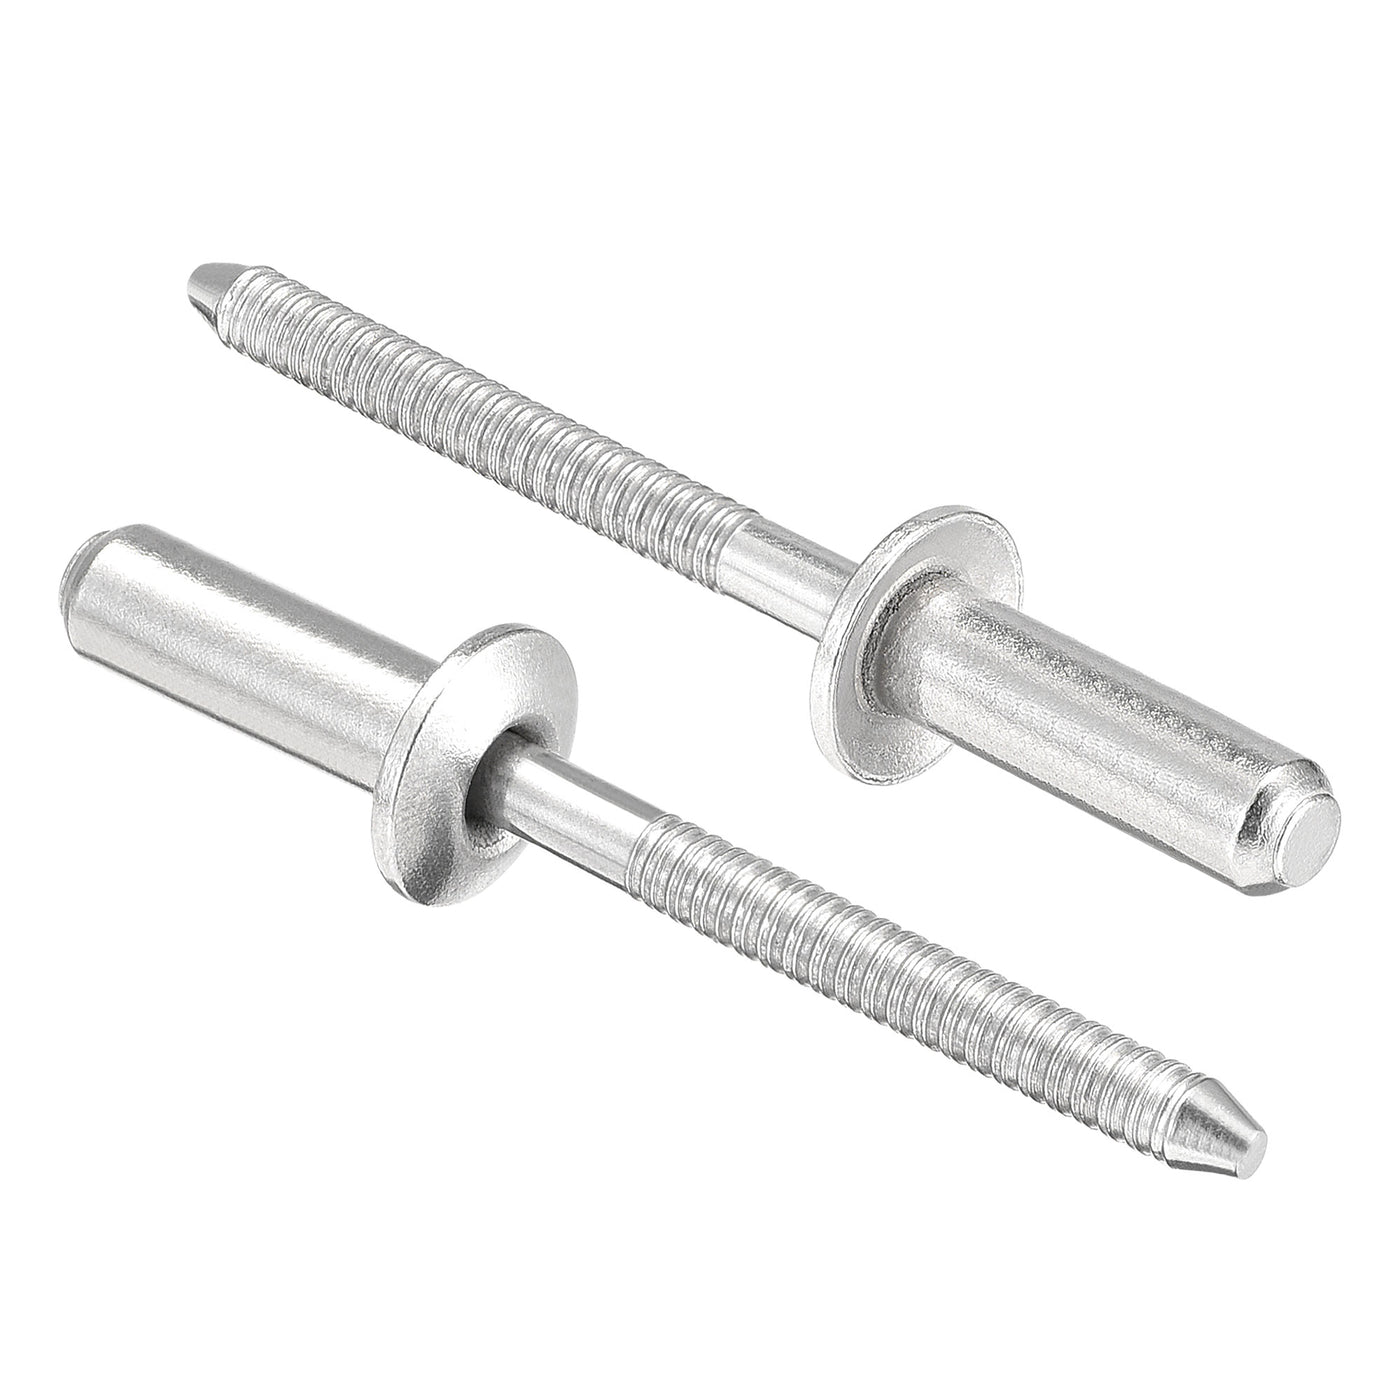 uxcell Uxcell Blind Rivets 304 Stainless Steel 4.8mm Diameter 16mm Grip Length 50pcs